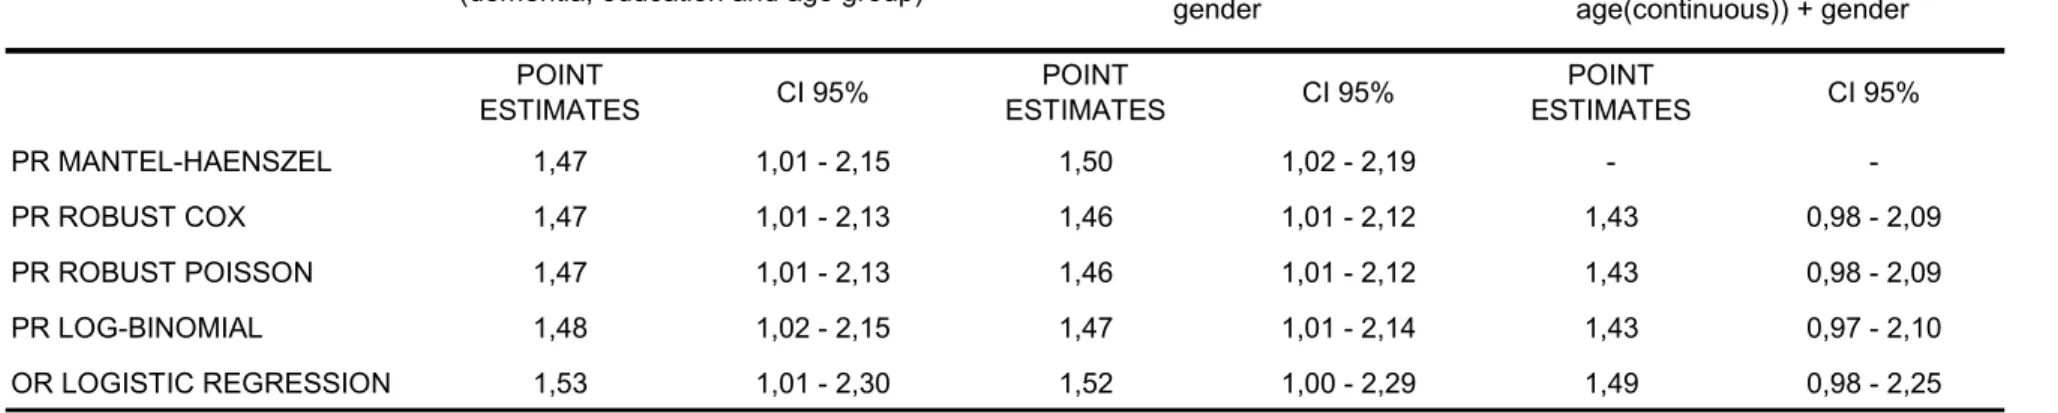 Table 2: Prevalence ratio estimates and 95% confidence intervals for the association between educational level and dementia, controlling for age  group, age group and gender, and age and gender, using MH stratification, Cox, Poisson, log-binomial and logis